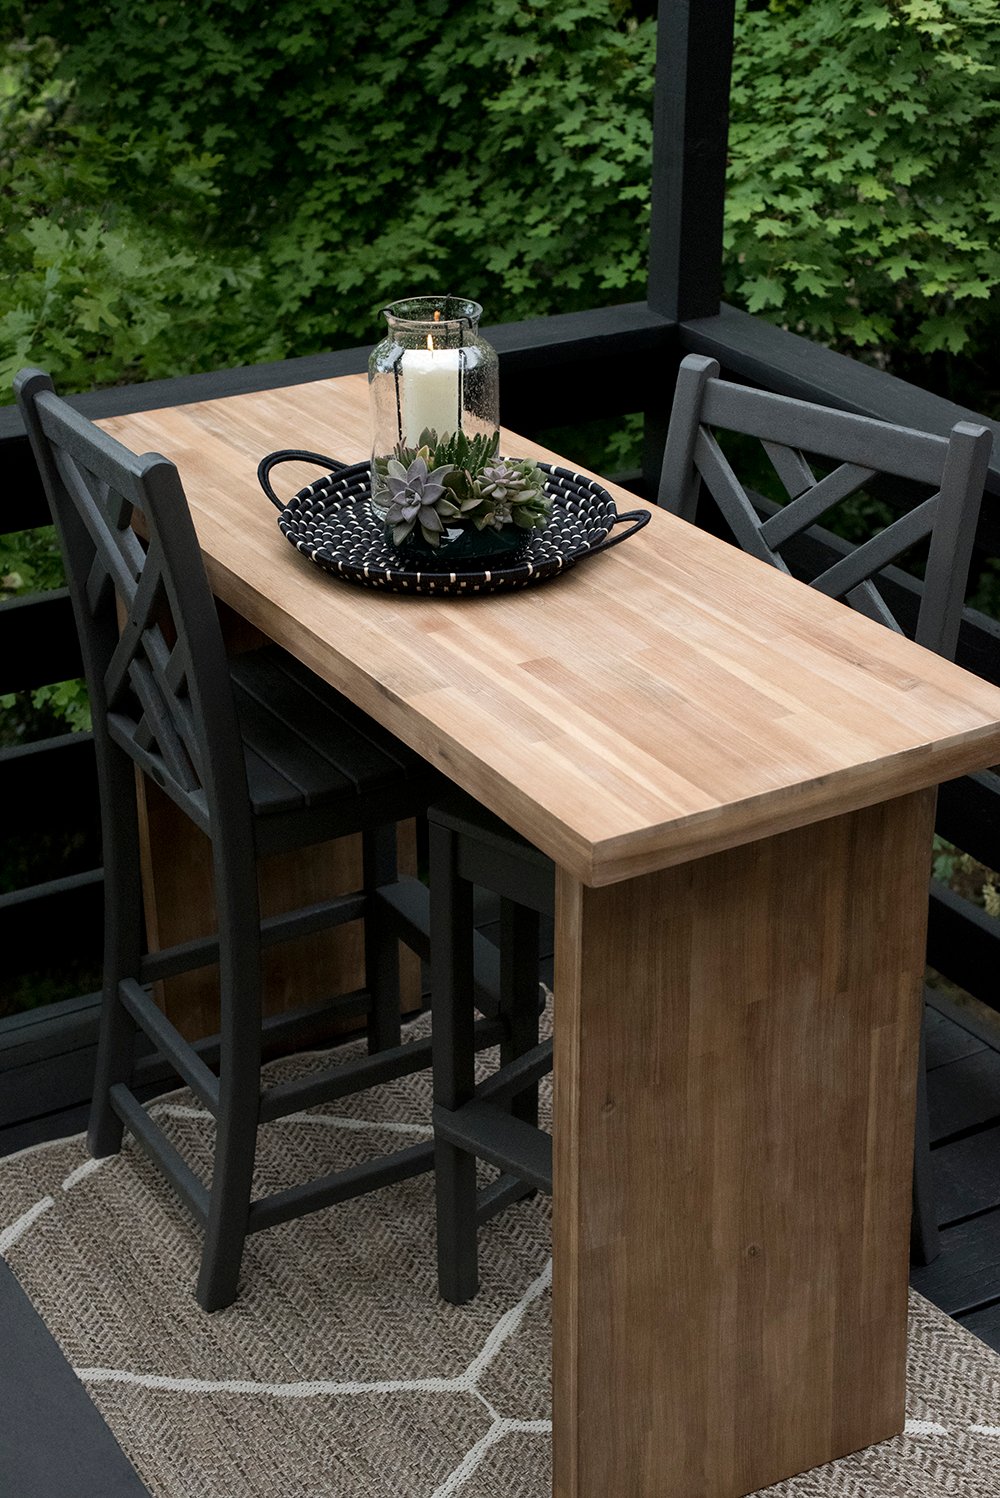 Outdoor Bar Height Table, Outdoor Bar Height Wood Table And Chairs